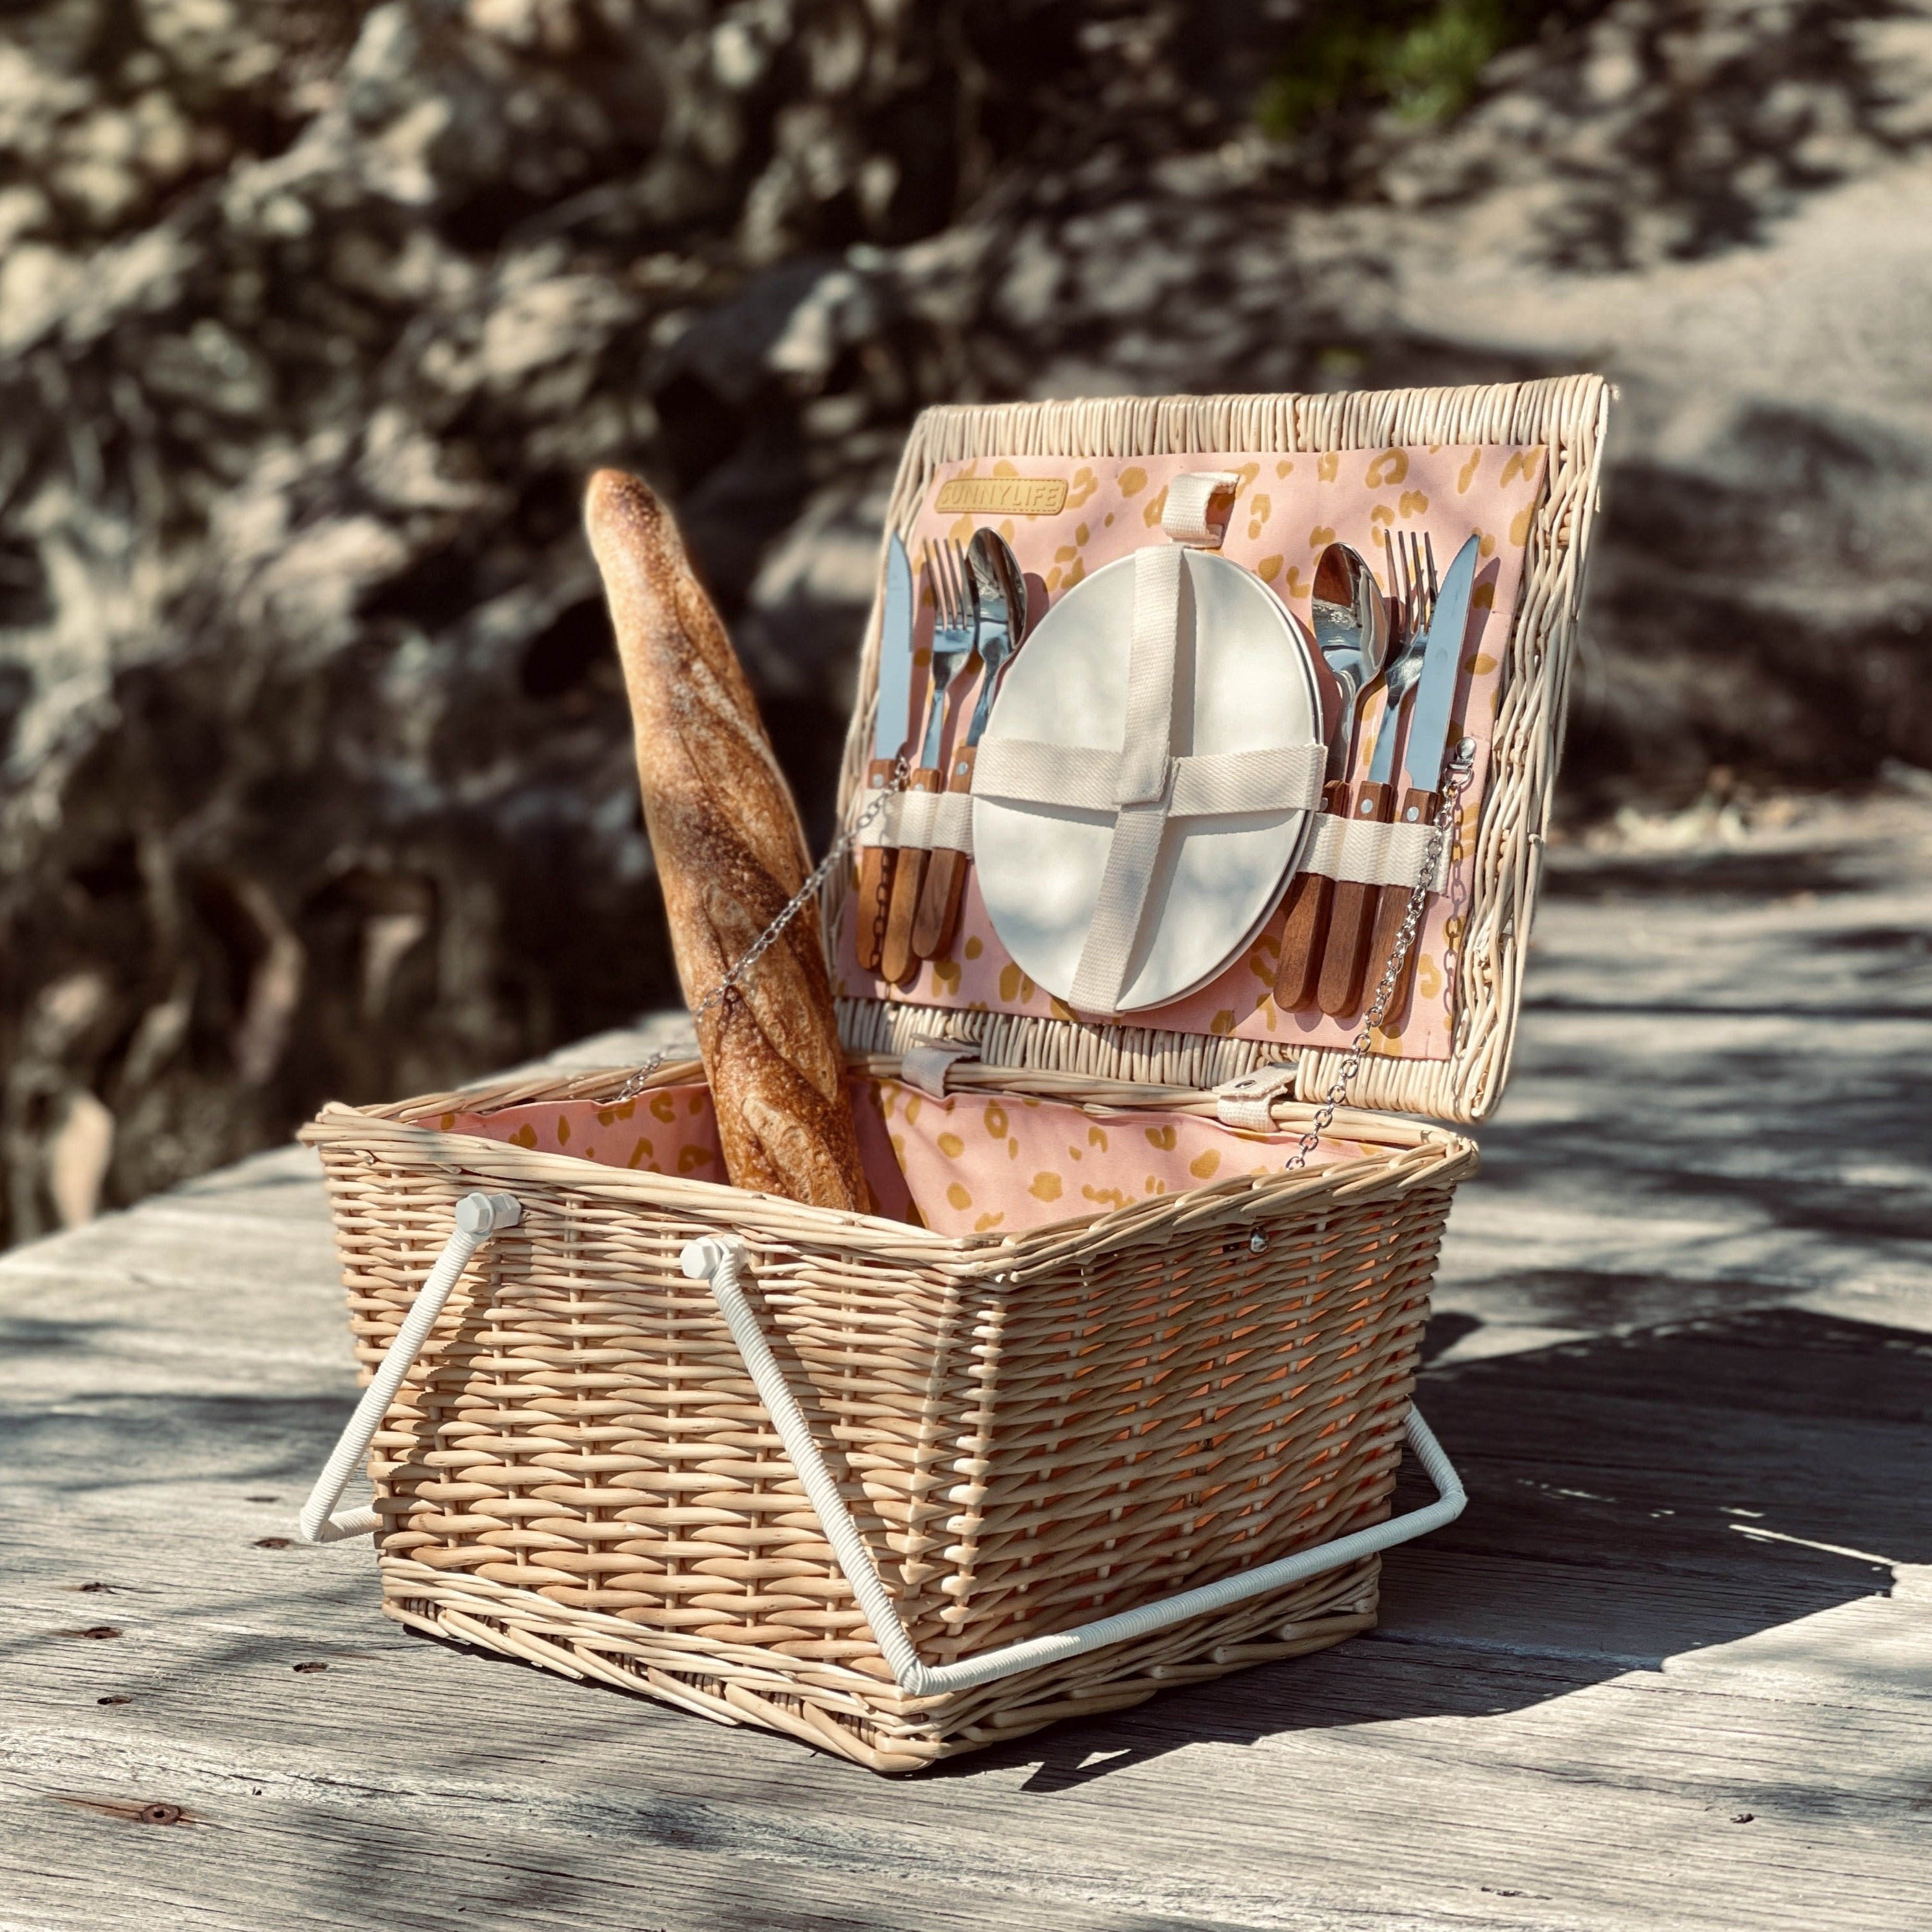 Small Picnic Basket | Call Of The Wild - Peachy Pink